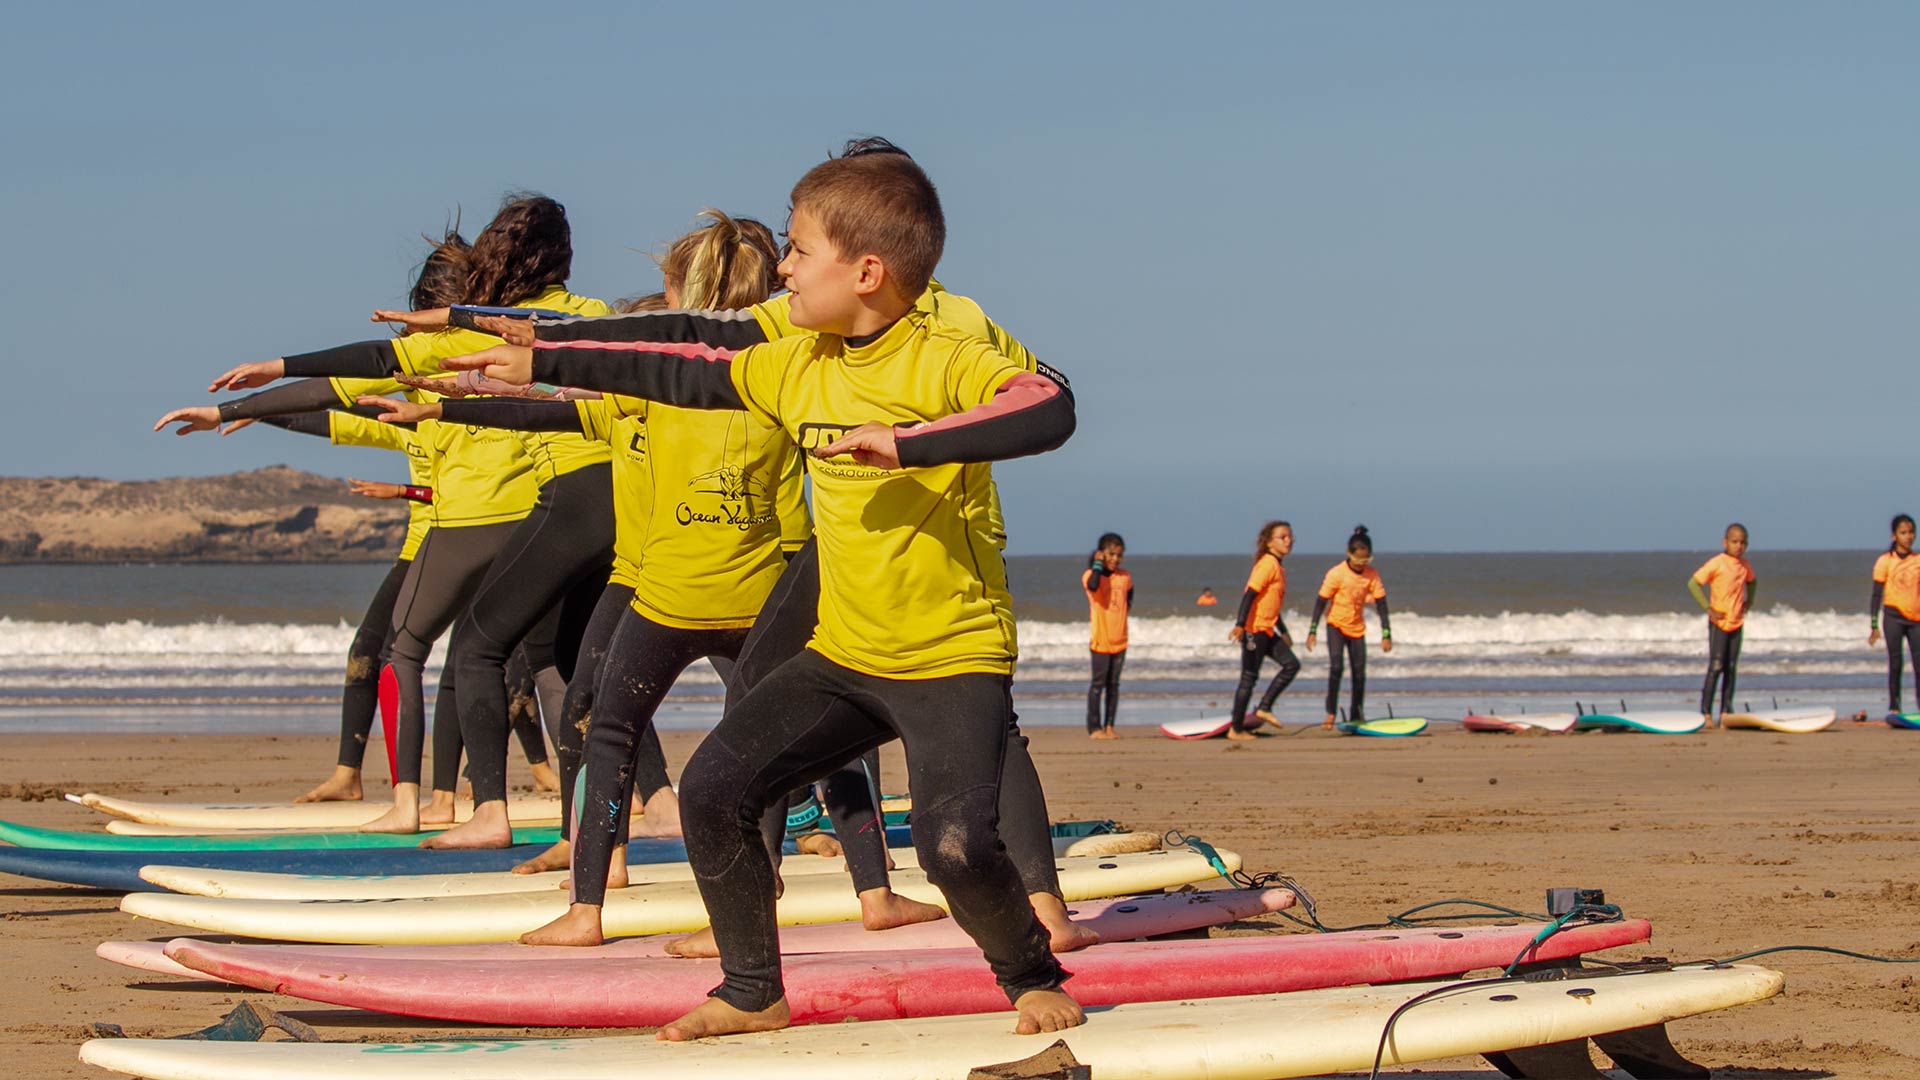 Surfing lesson on the beach with kids group